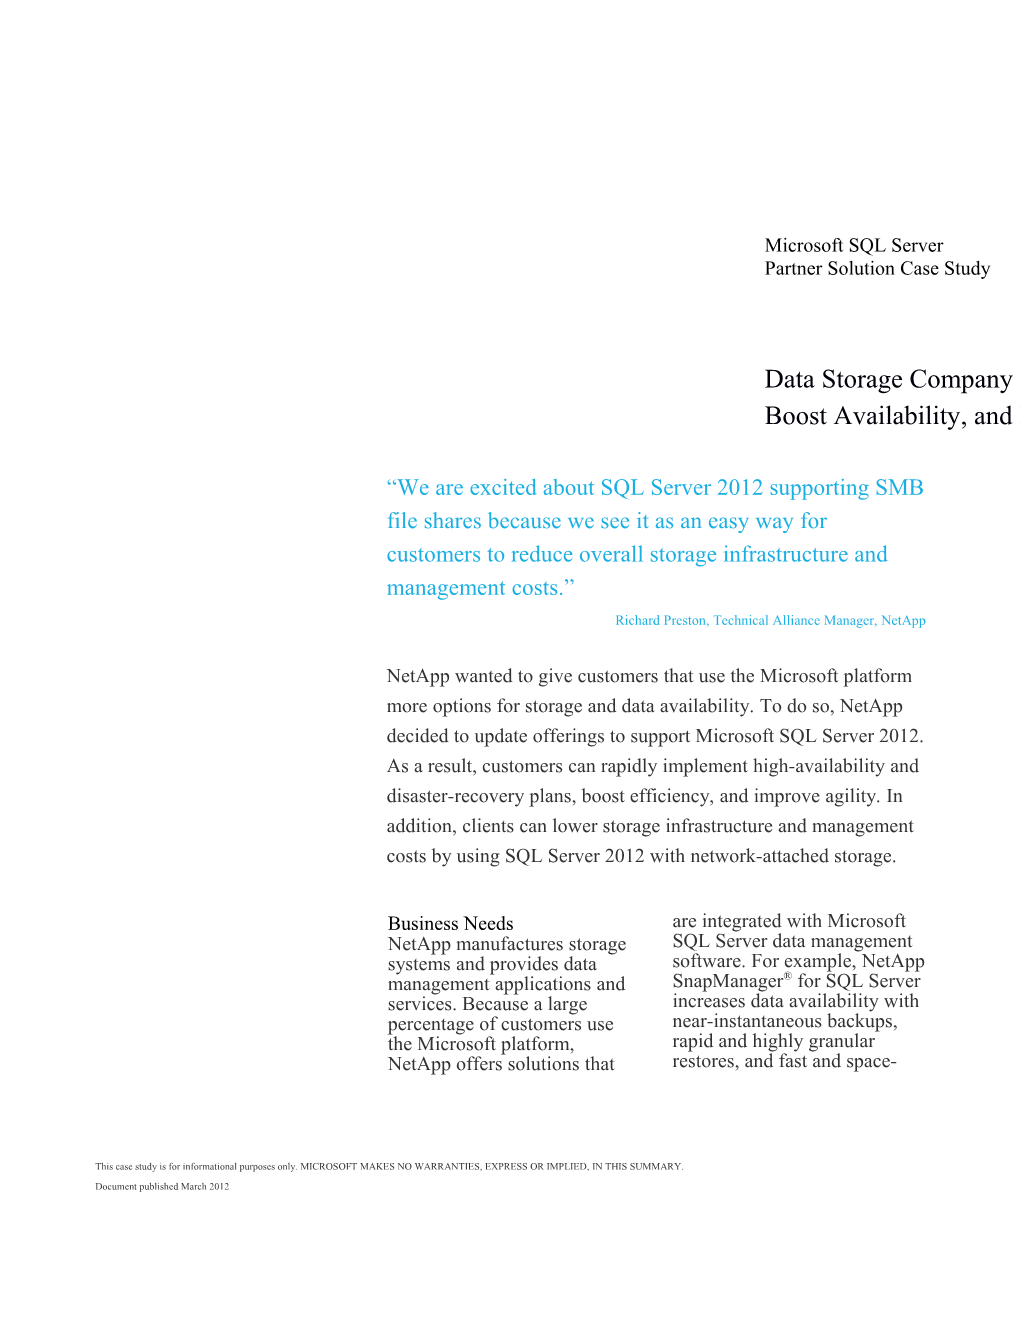 Data Storage Company Helps Clients Cut Costs, Boost Availability, and Increase Agility